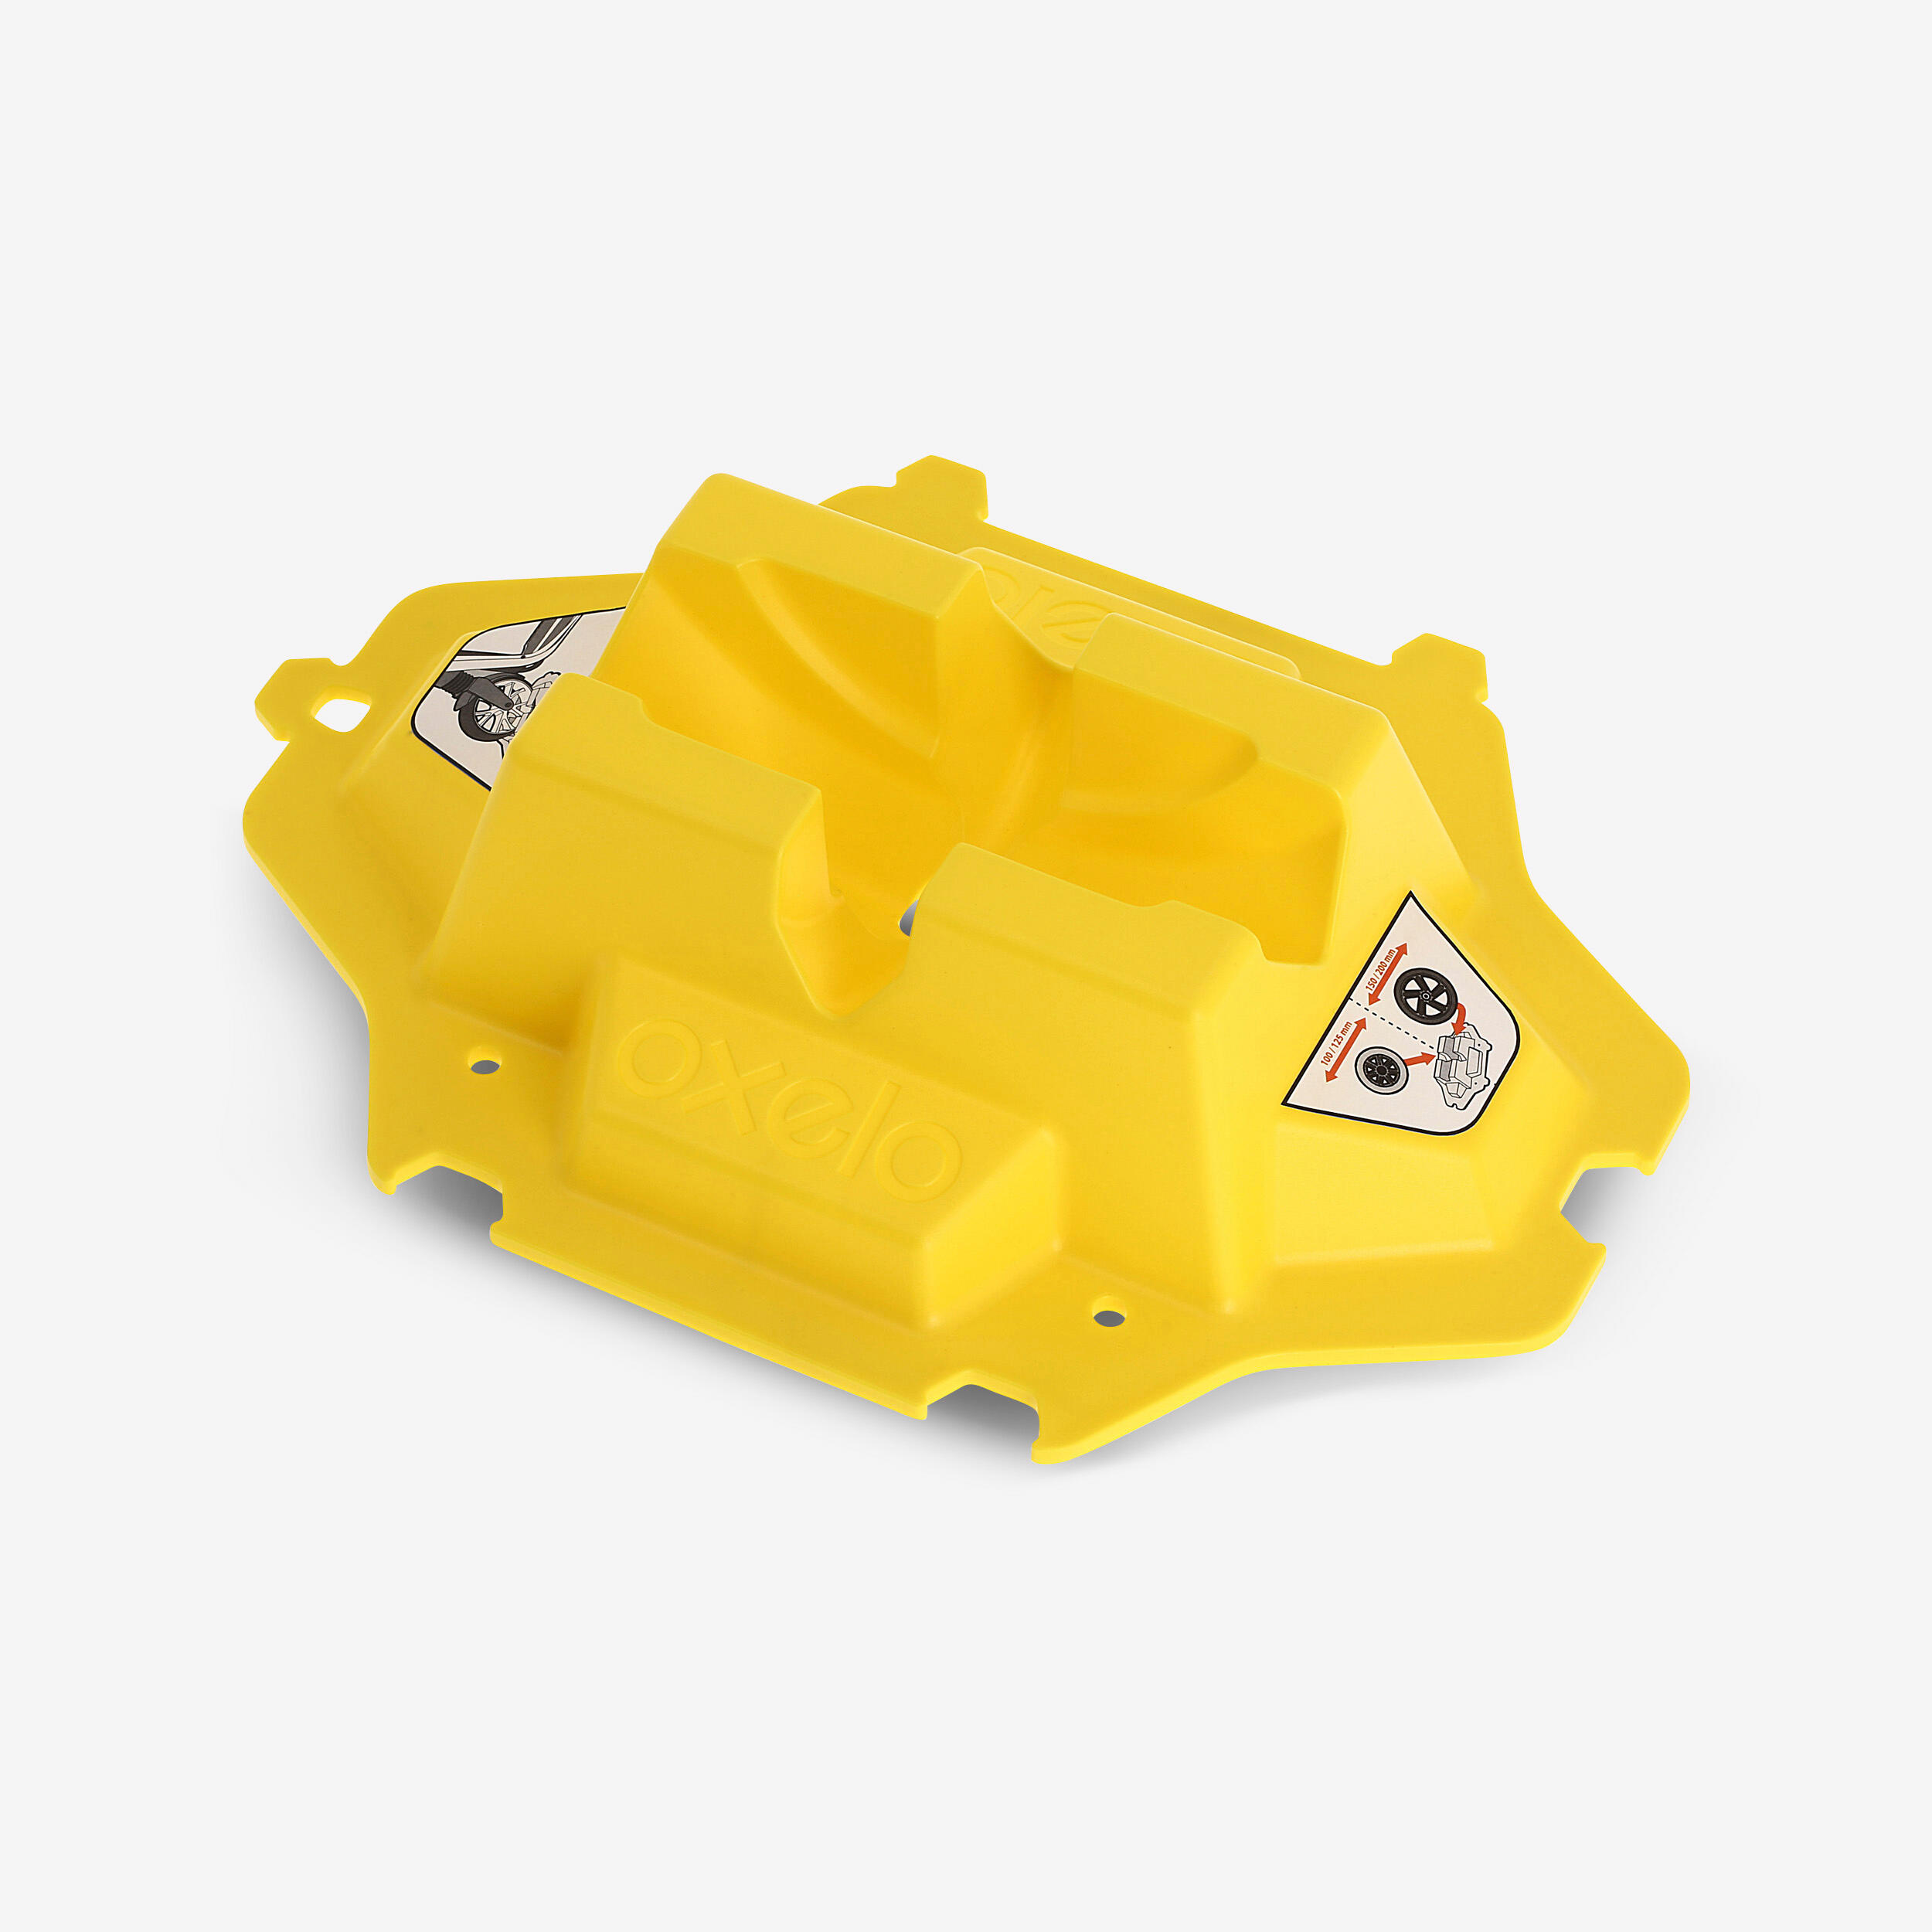 OXELO Scooter Rack - Yellow